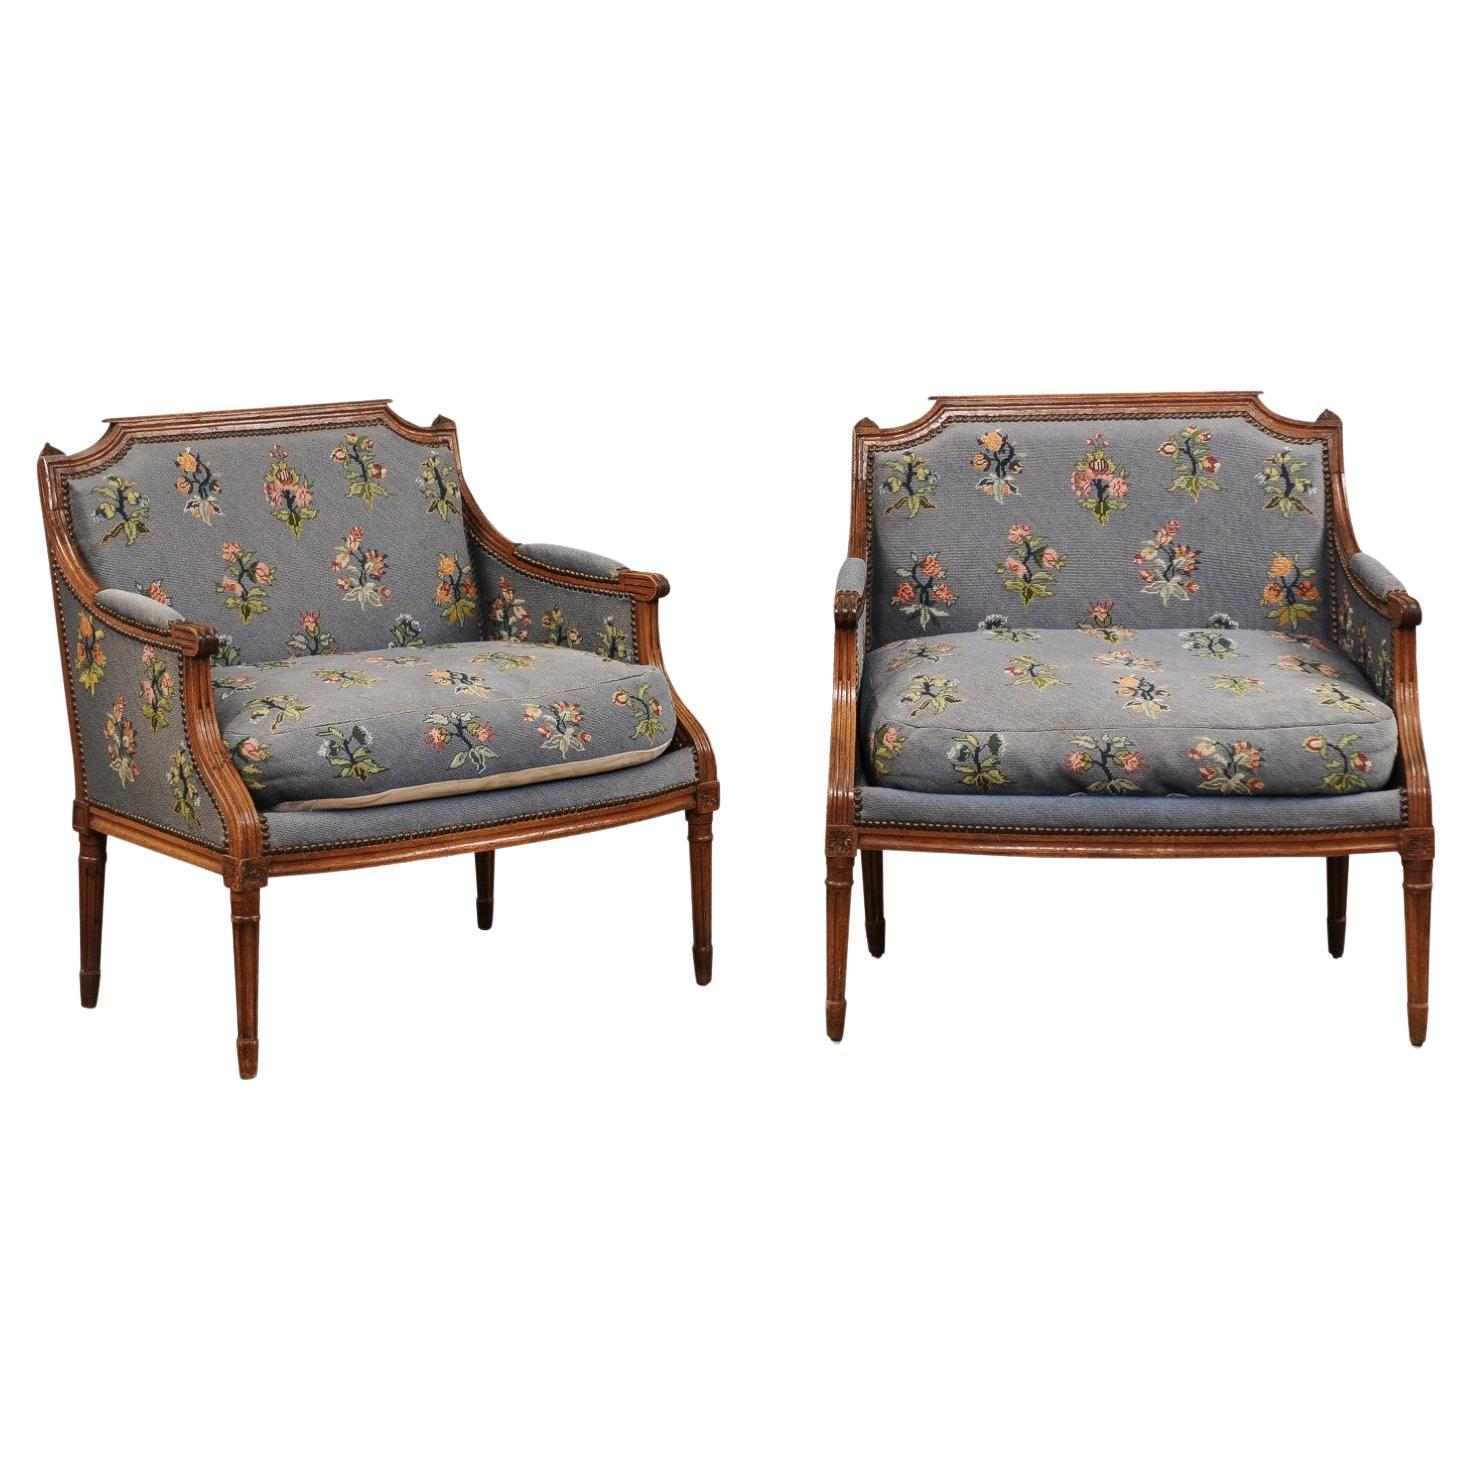 Pair of French Louis XVI Period 1790s Bergère Marquise Chairs with Upholstery